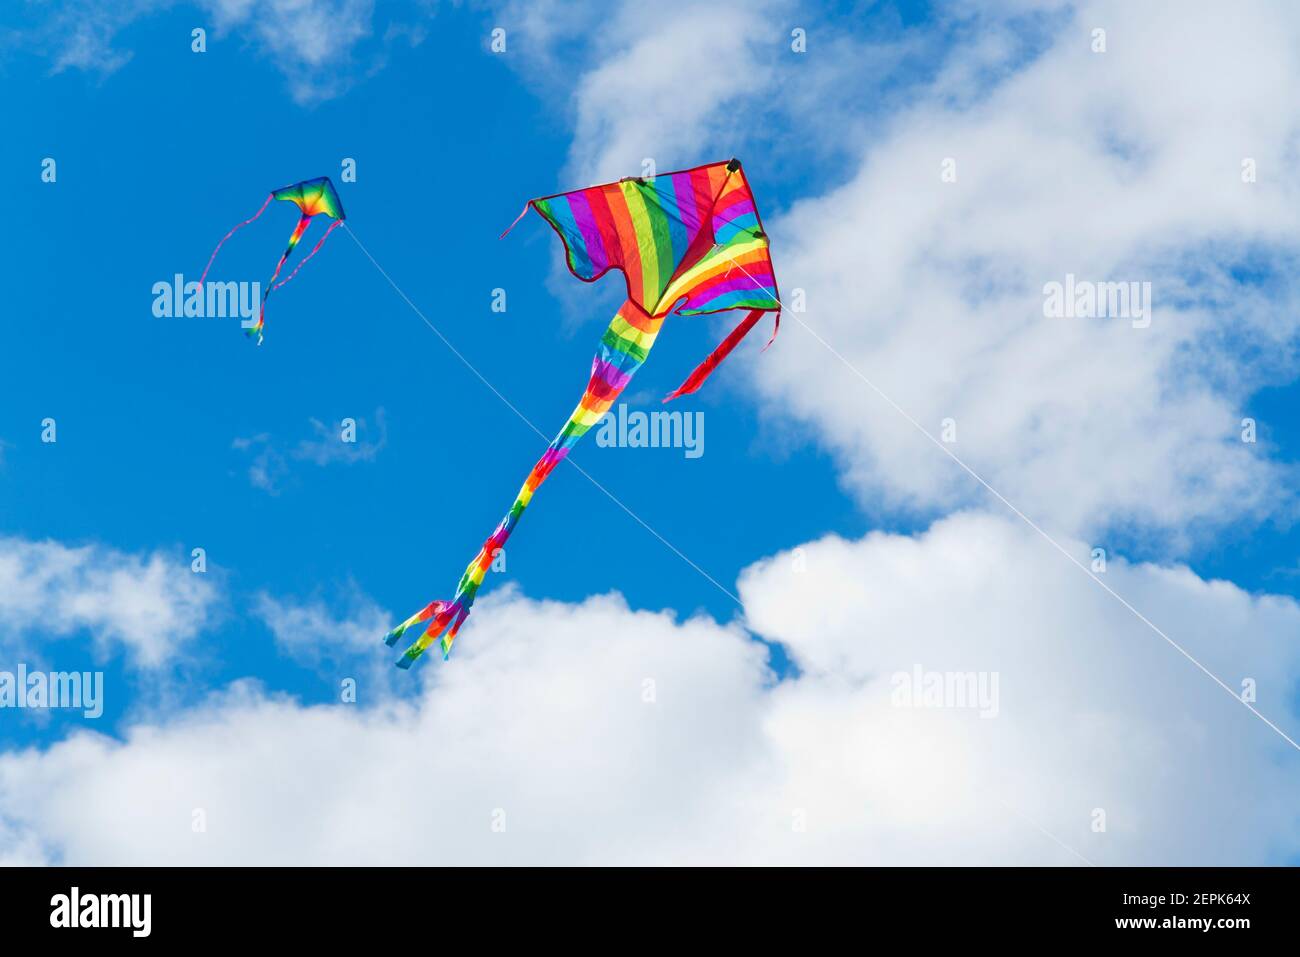 Two colorful kites in a blue sky with white clouds - focus on the kite in the foreground Stock Photo